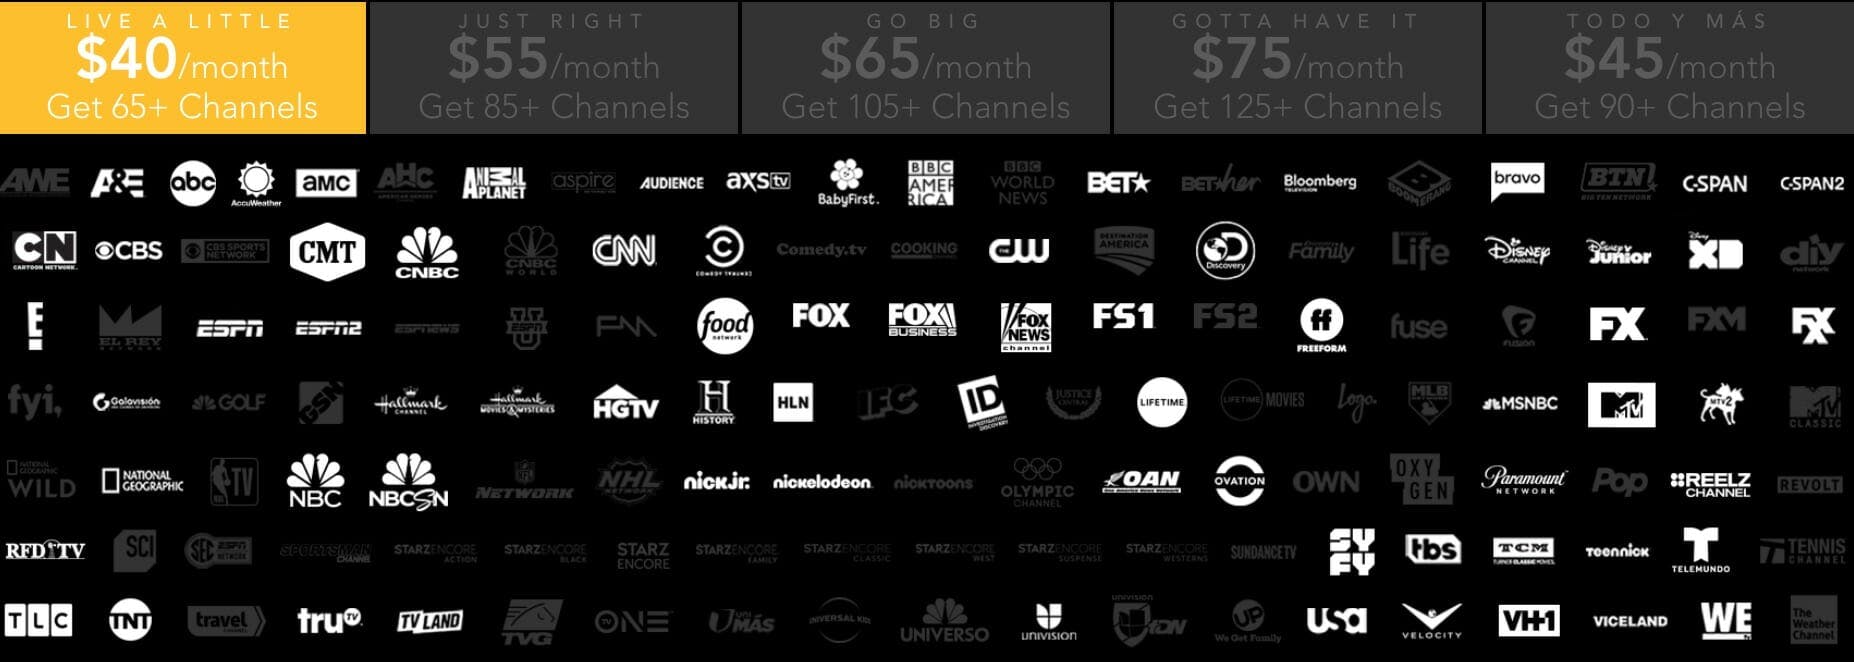 2018 election results directv now channels live a little